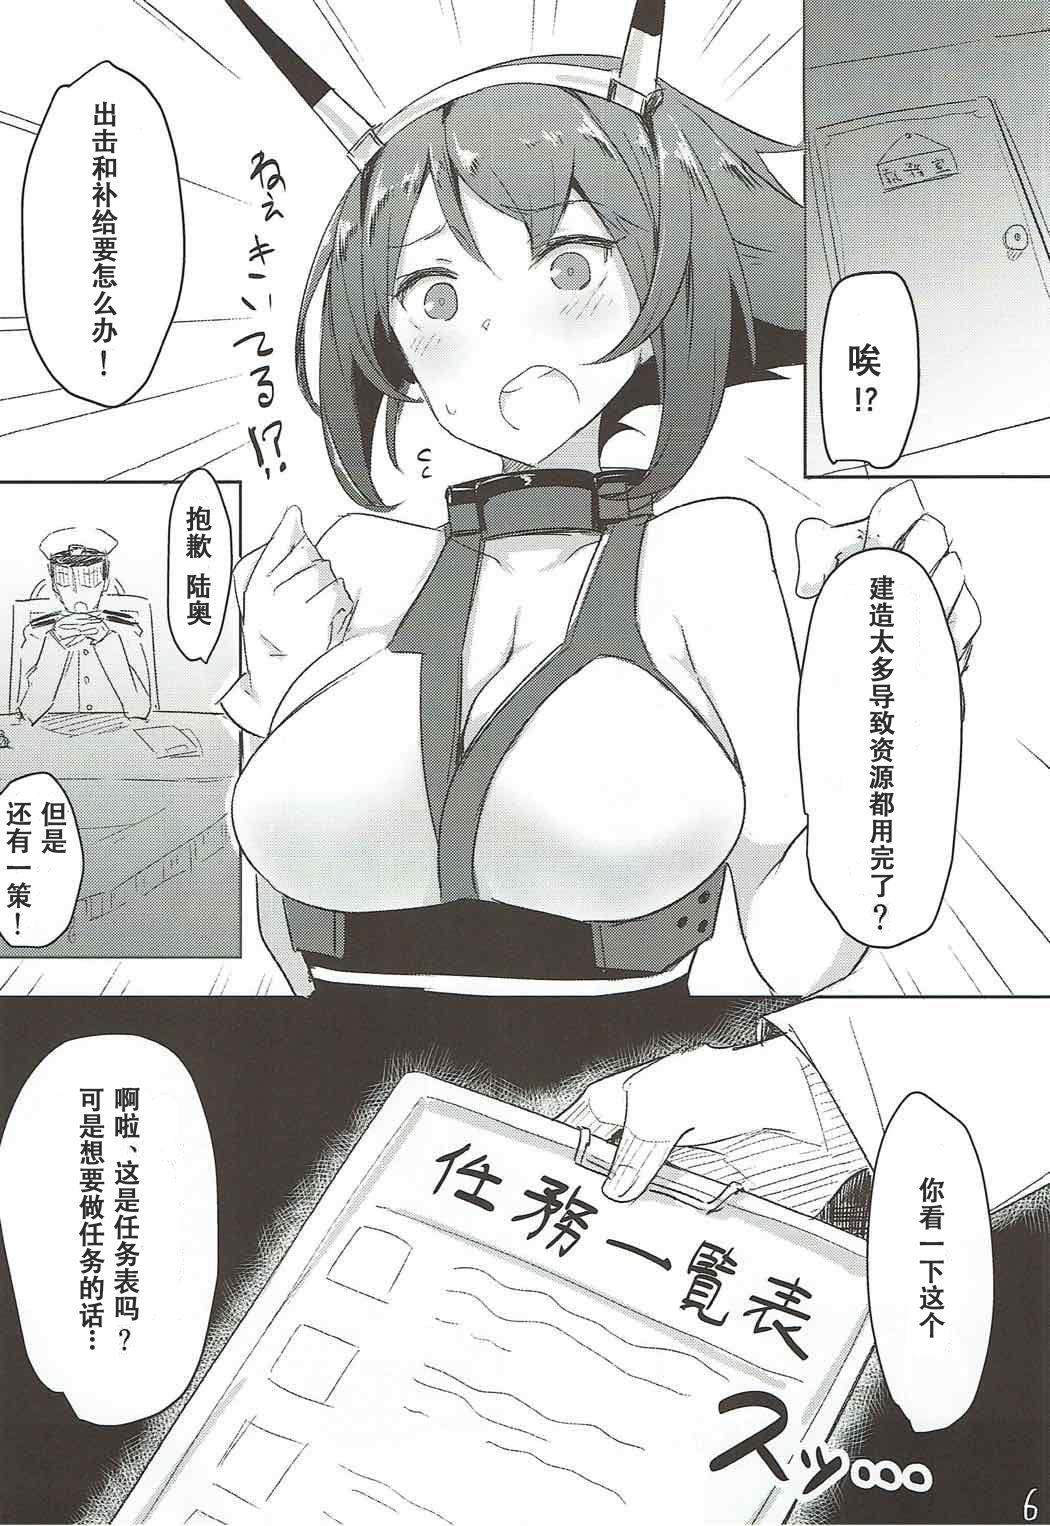 Freaky Mucchiri - Kantai collection Audition - Page 6